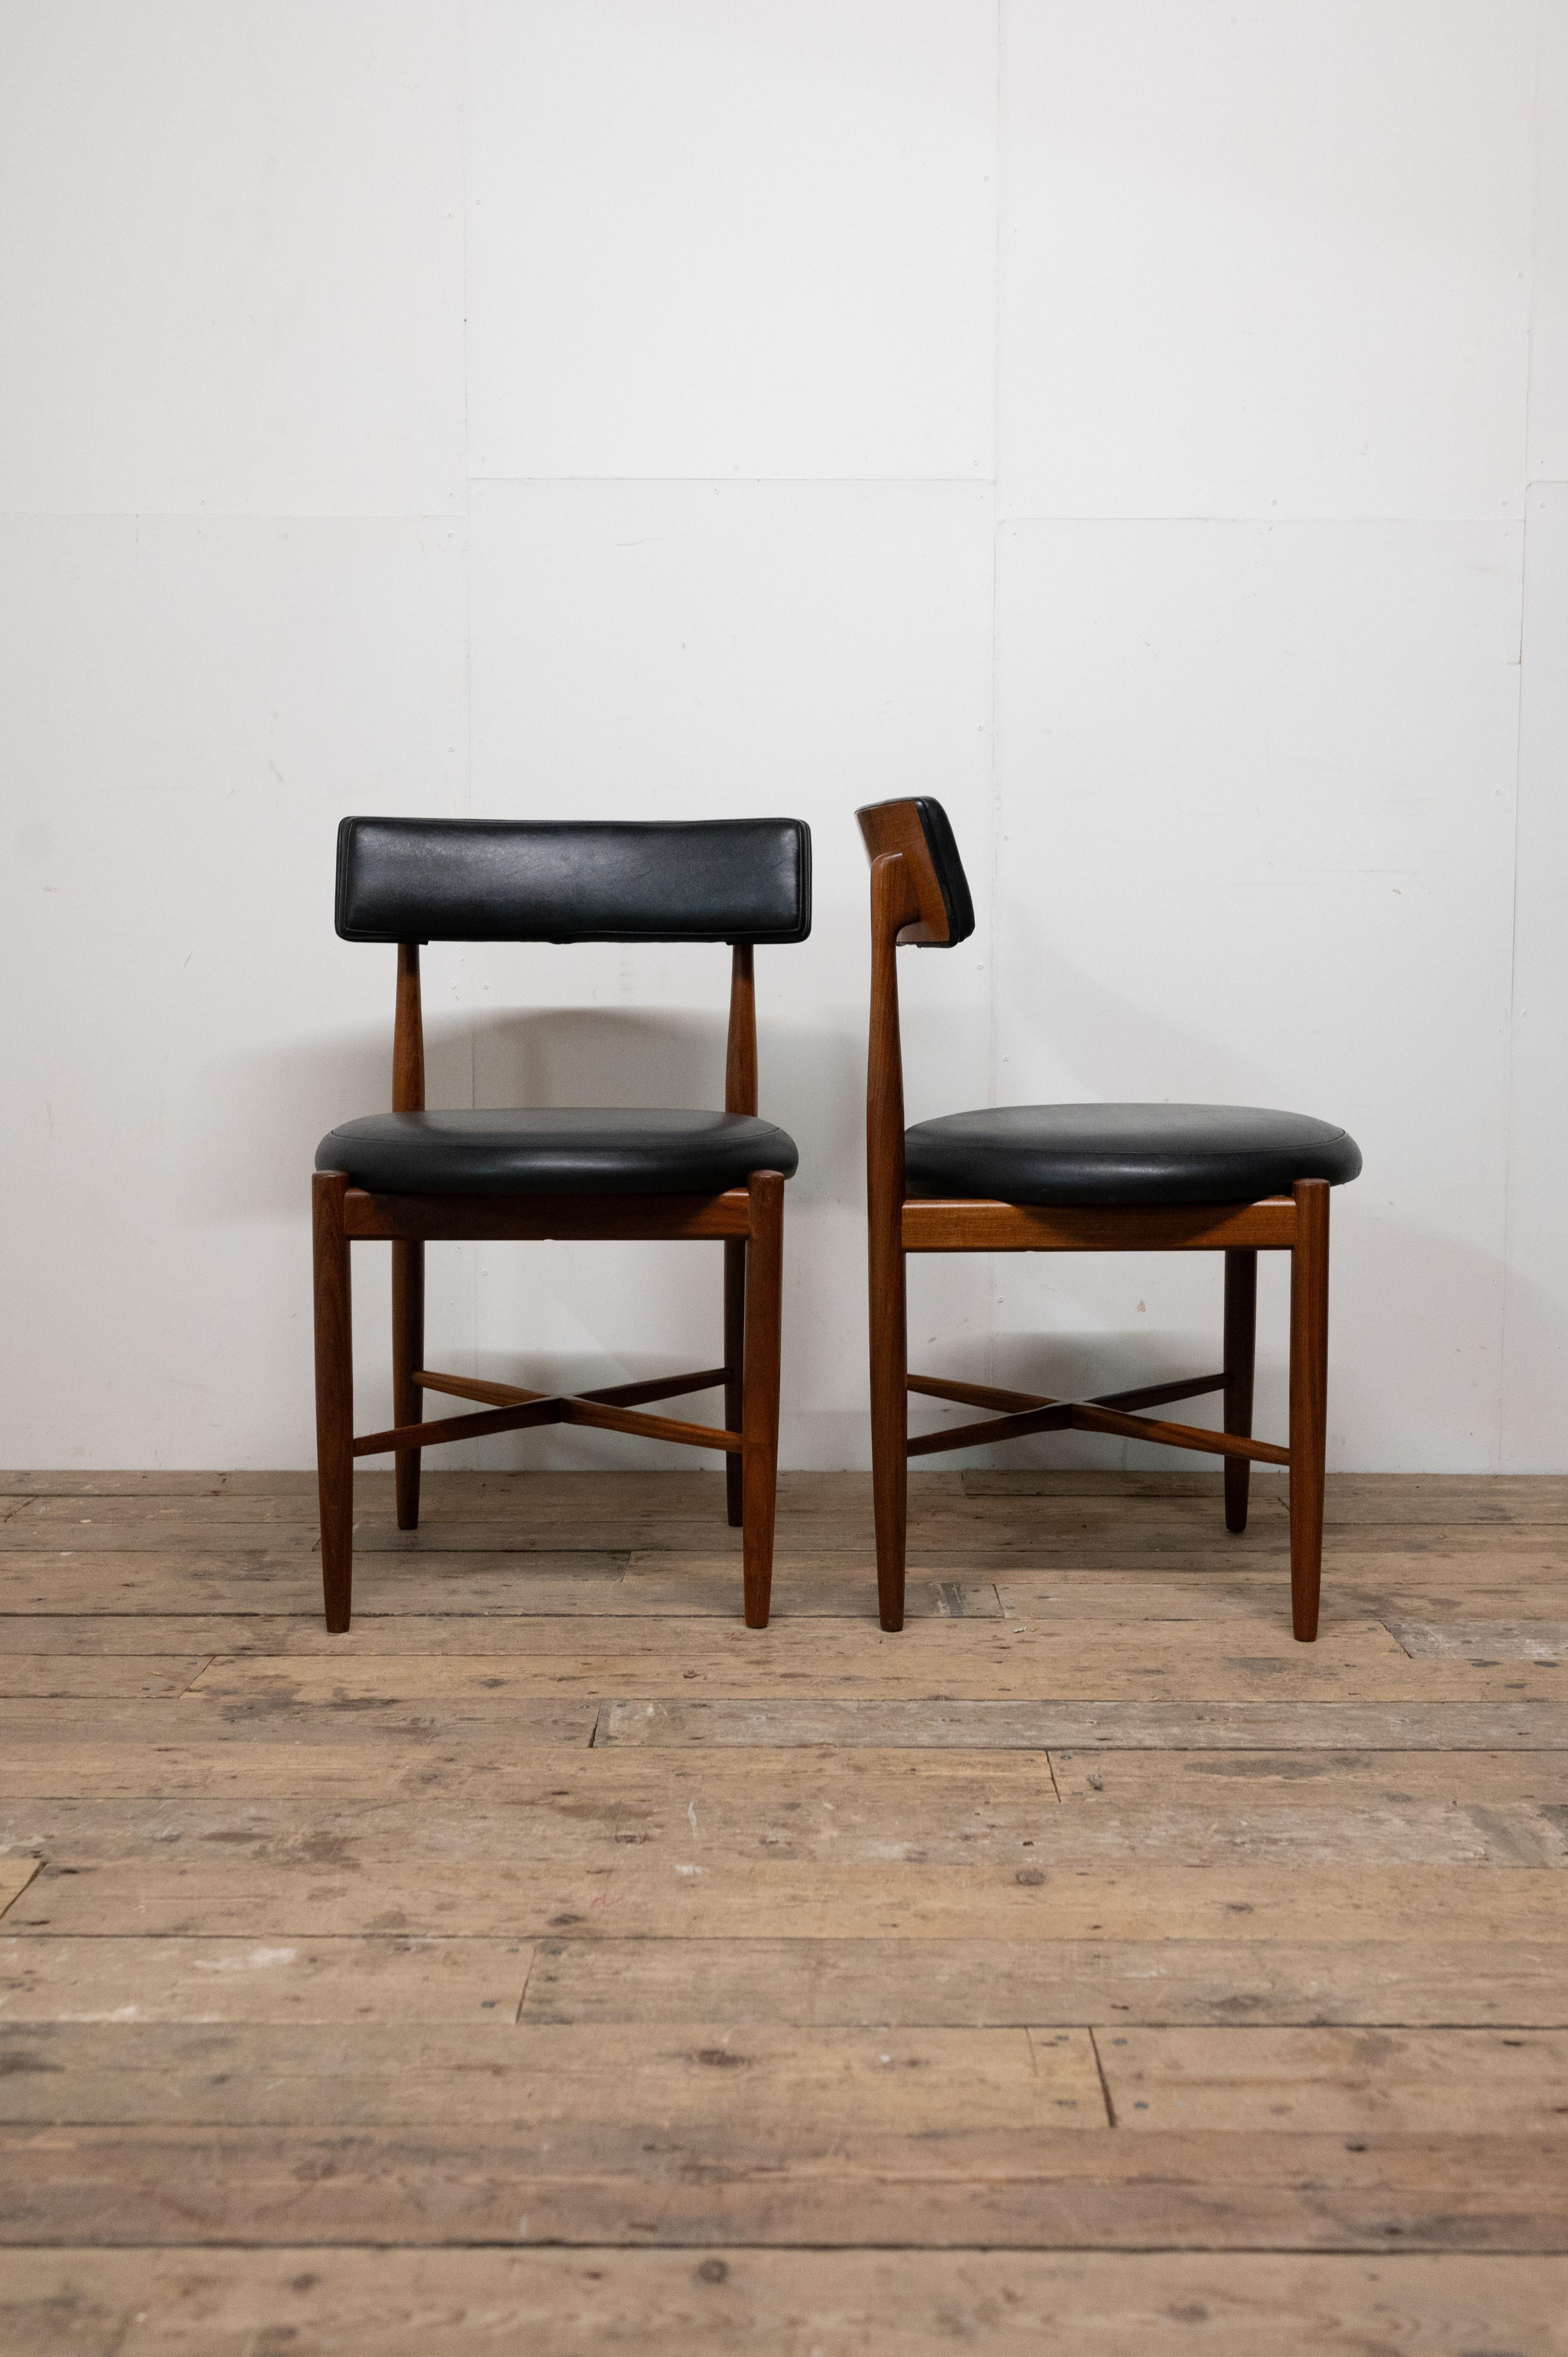 Introduce a touch of mid-century elegance to your dining space with this remarkable pair of Teak Dining Chairs by V. Wilkins for G Plan, featuring original upholstery in excellent condition.

These chairs are a testament to both style and comfort.